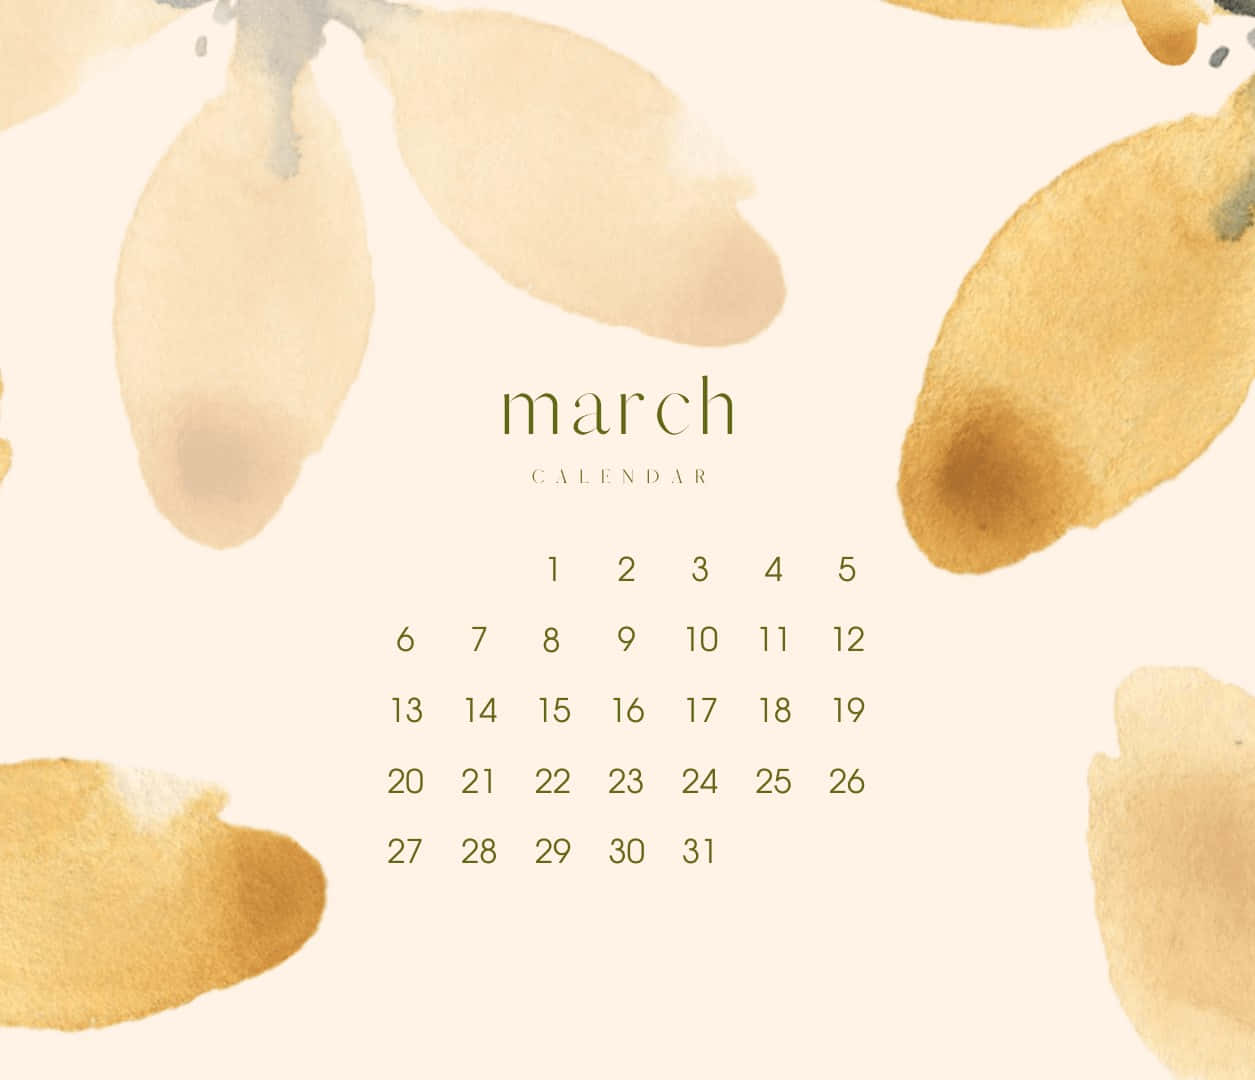 Celebrating the Arrival of March